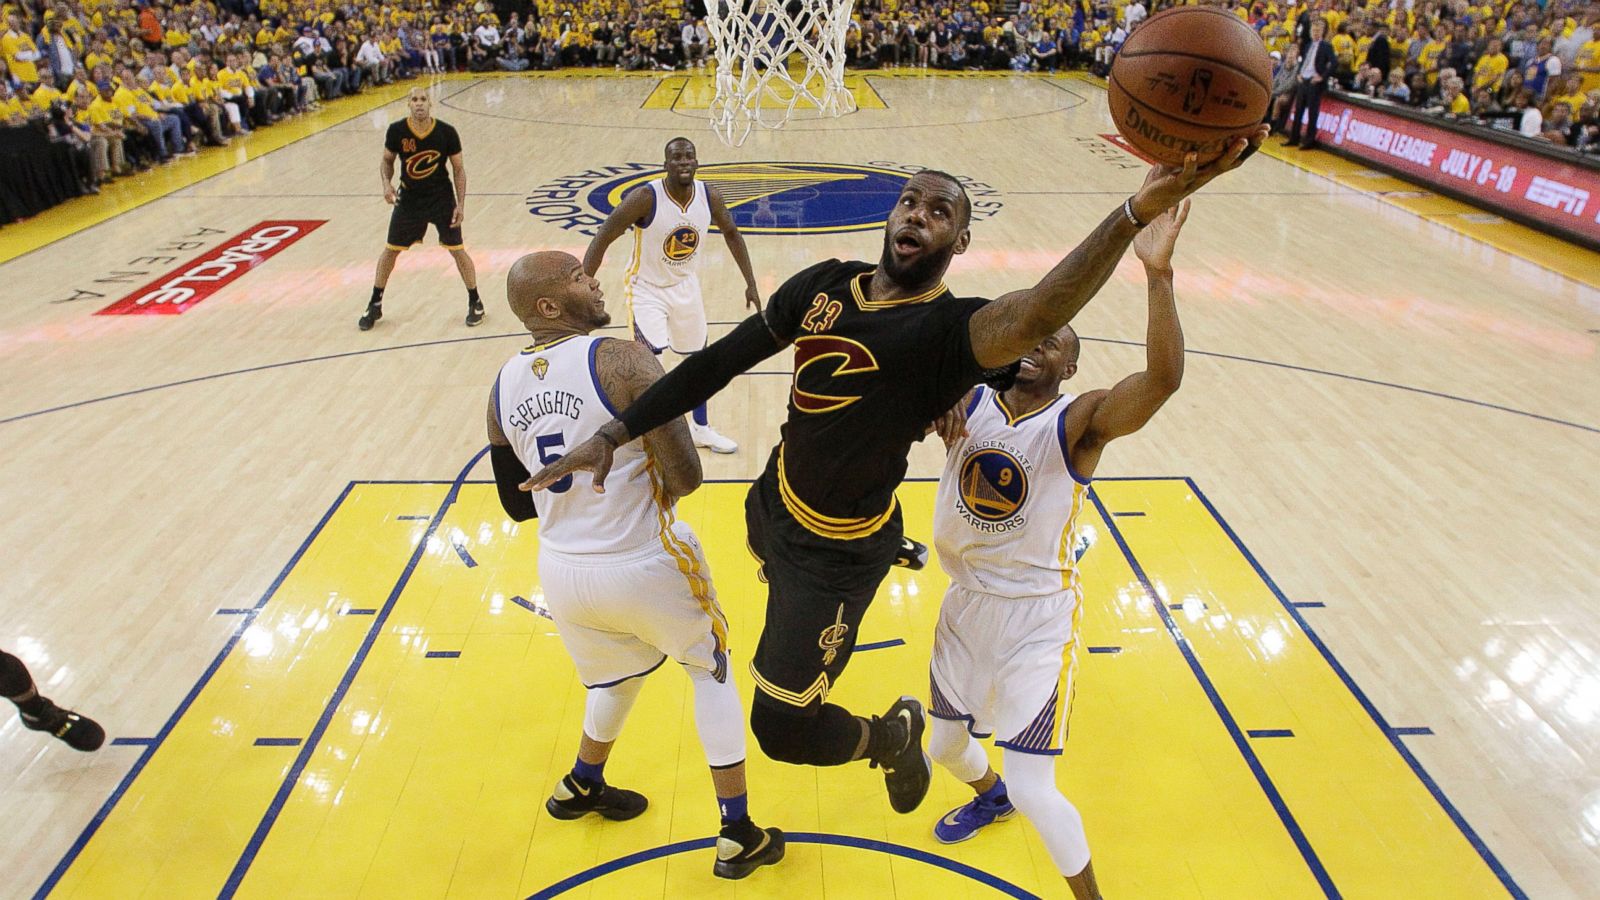 Warriors defeat Cavaliers for third NBA title in four years